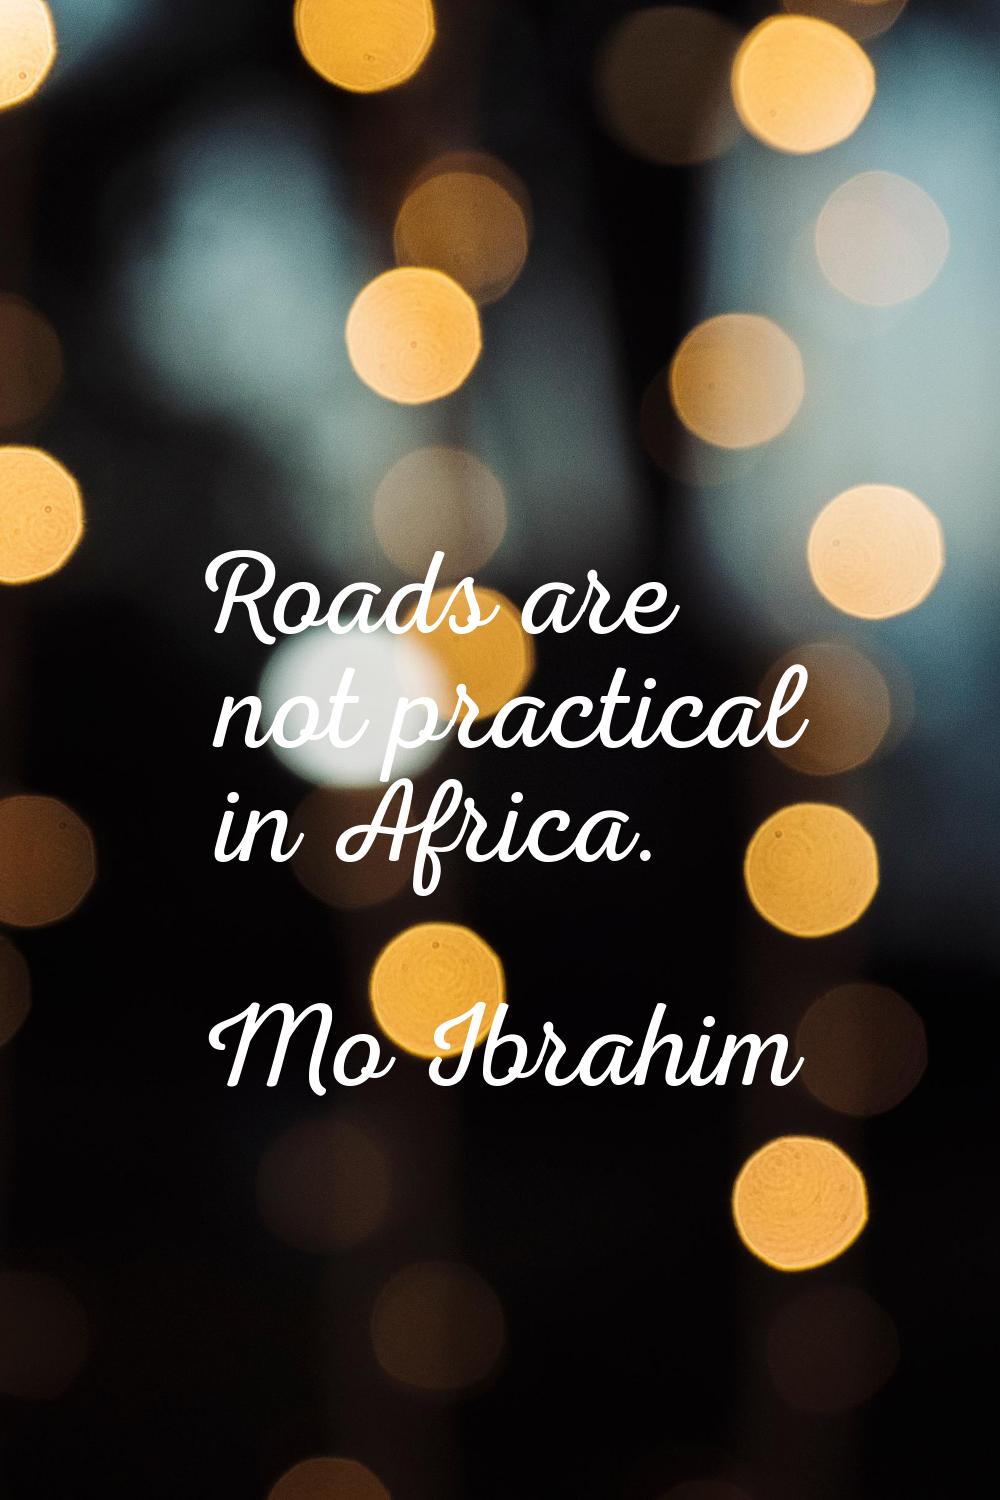 Roads are not practical in Africa.